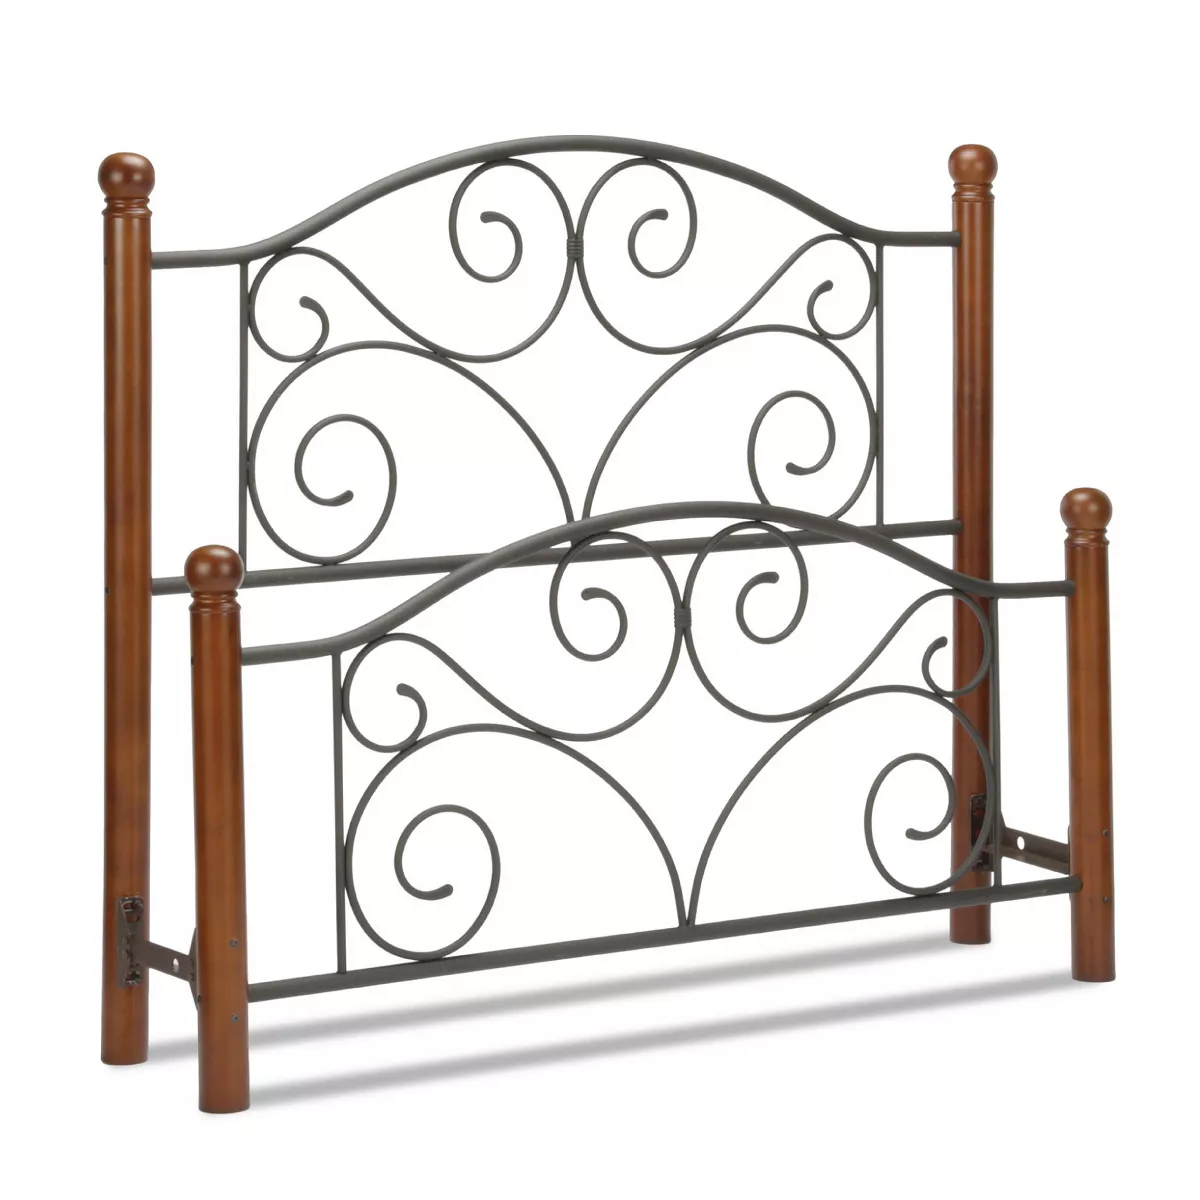 eLuxury™ Doral Metal and Wood Bed with Headboard and Footboard - Full, Black
